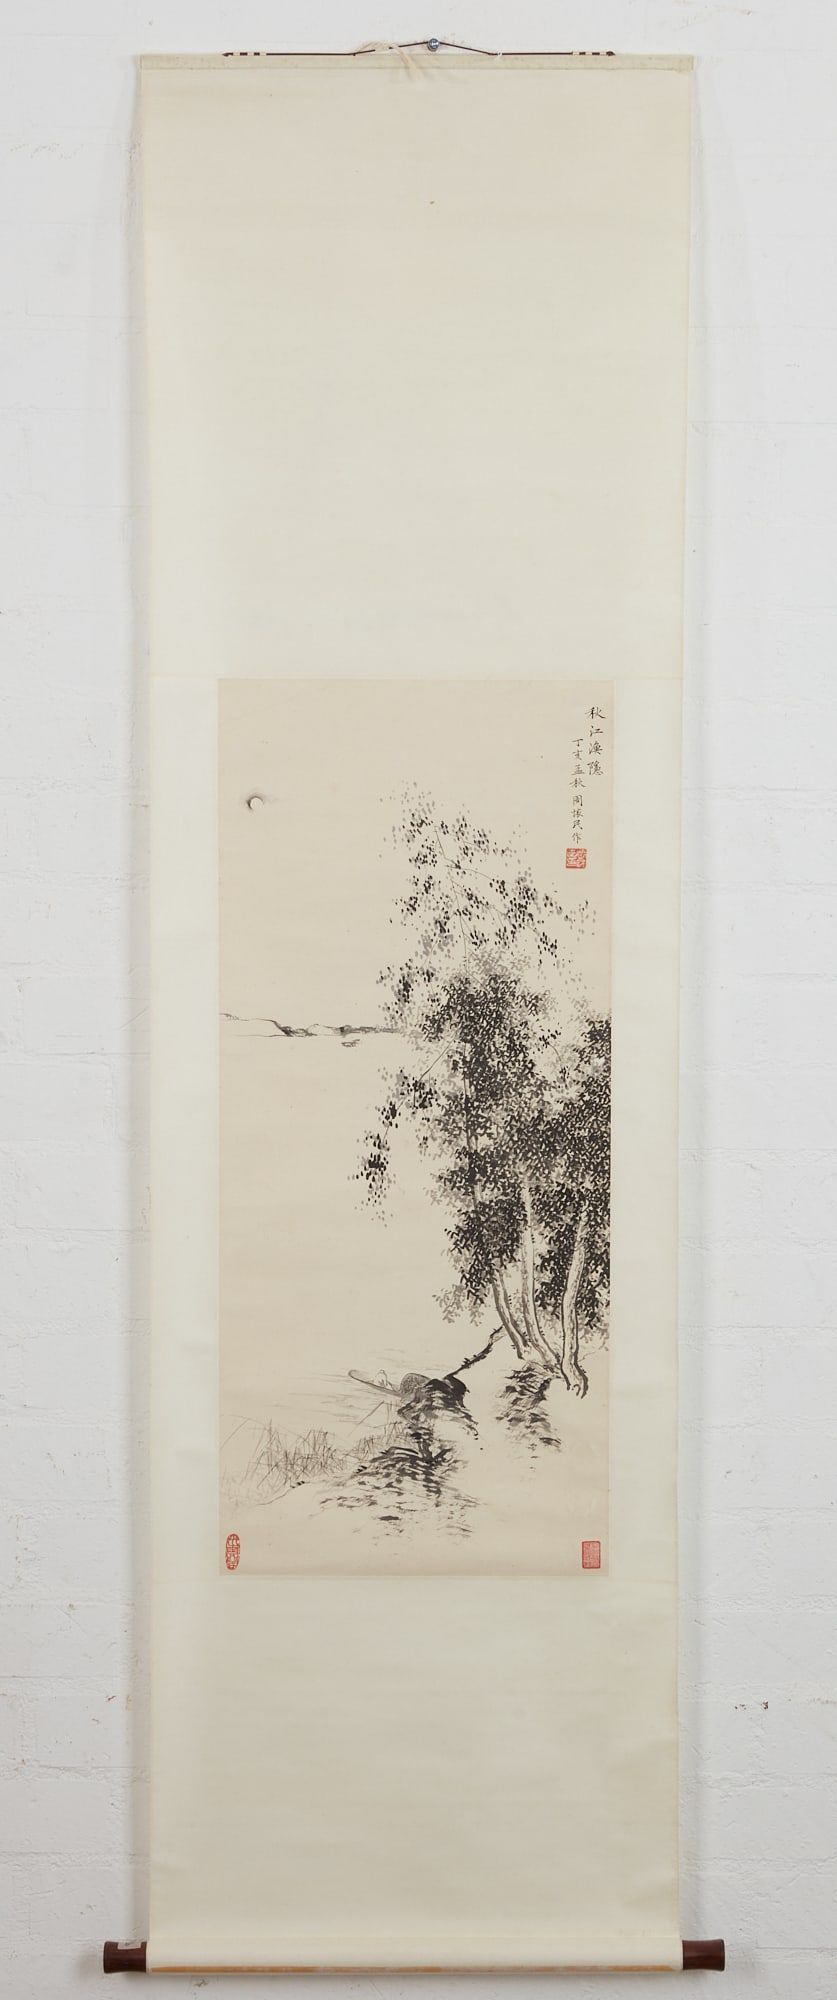 A CHINESE LANDSCAPE PAINTED SCROLLA